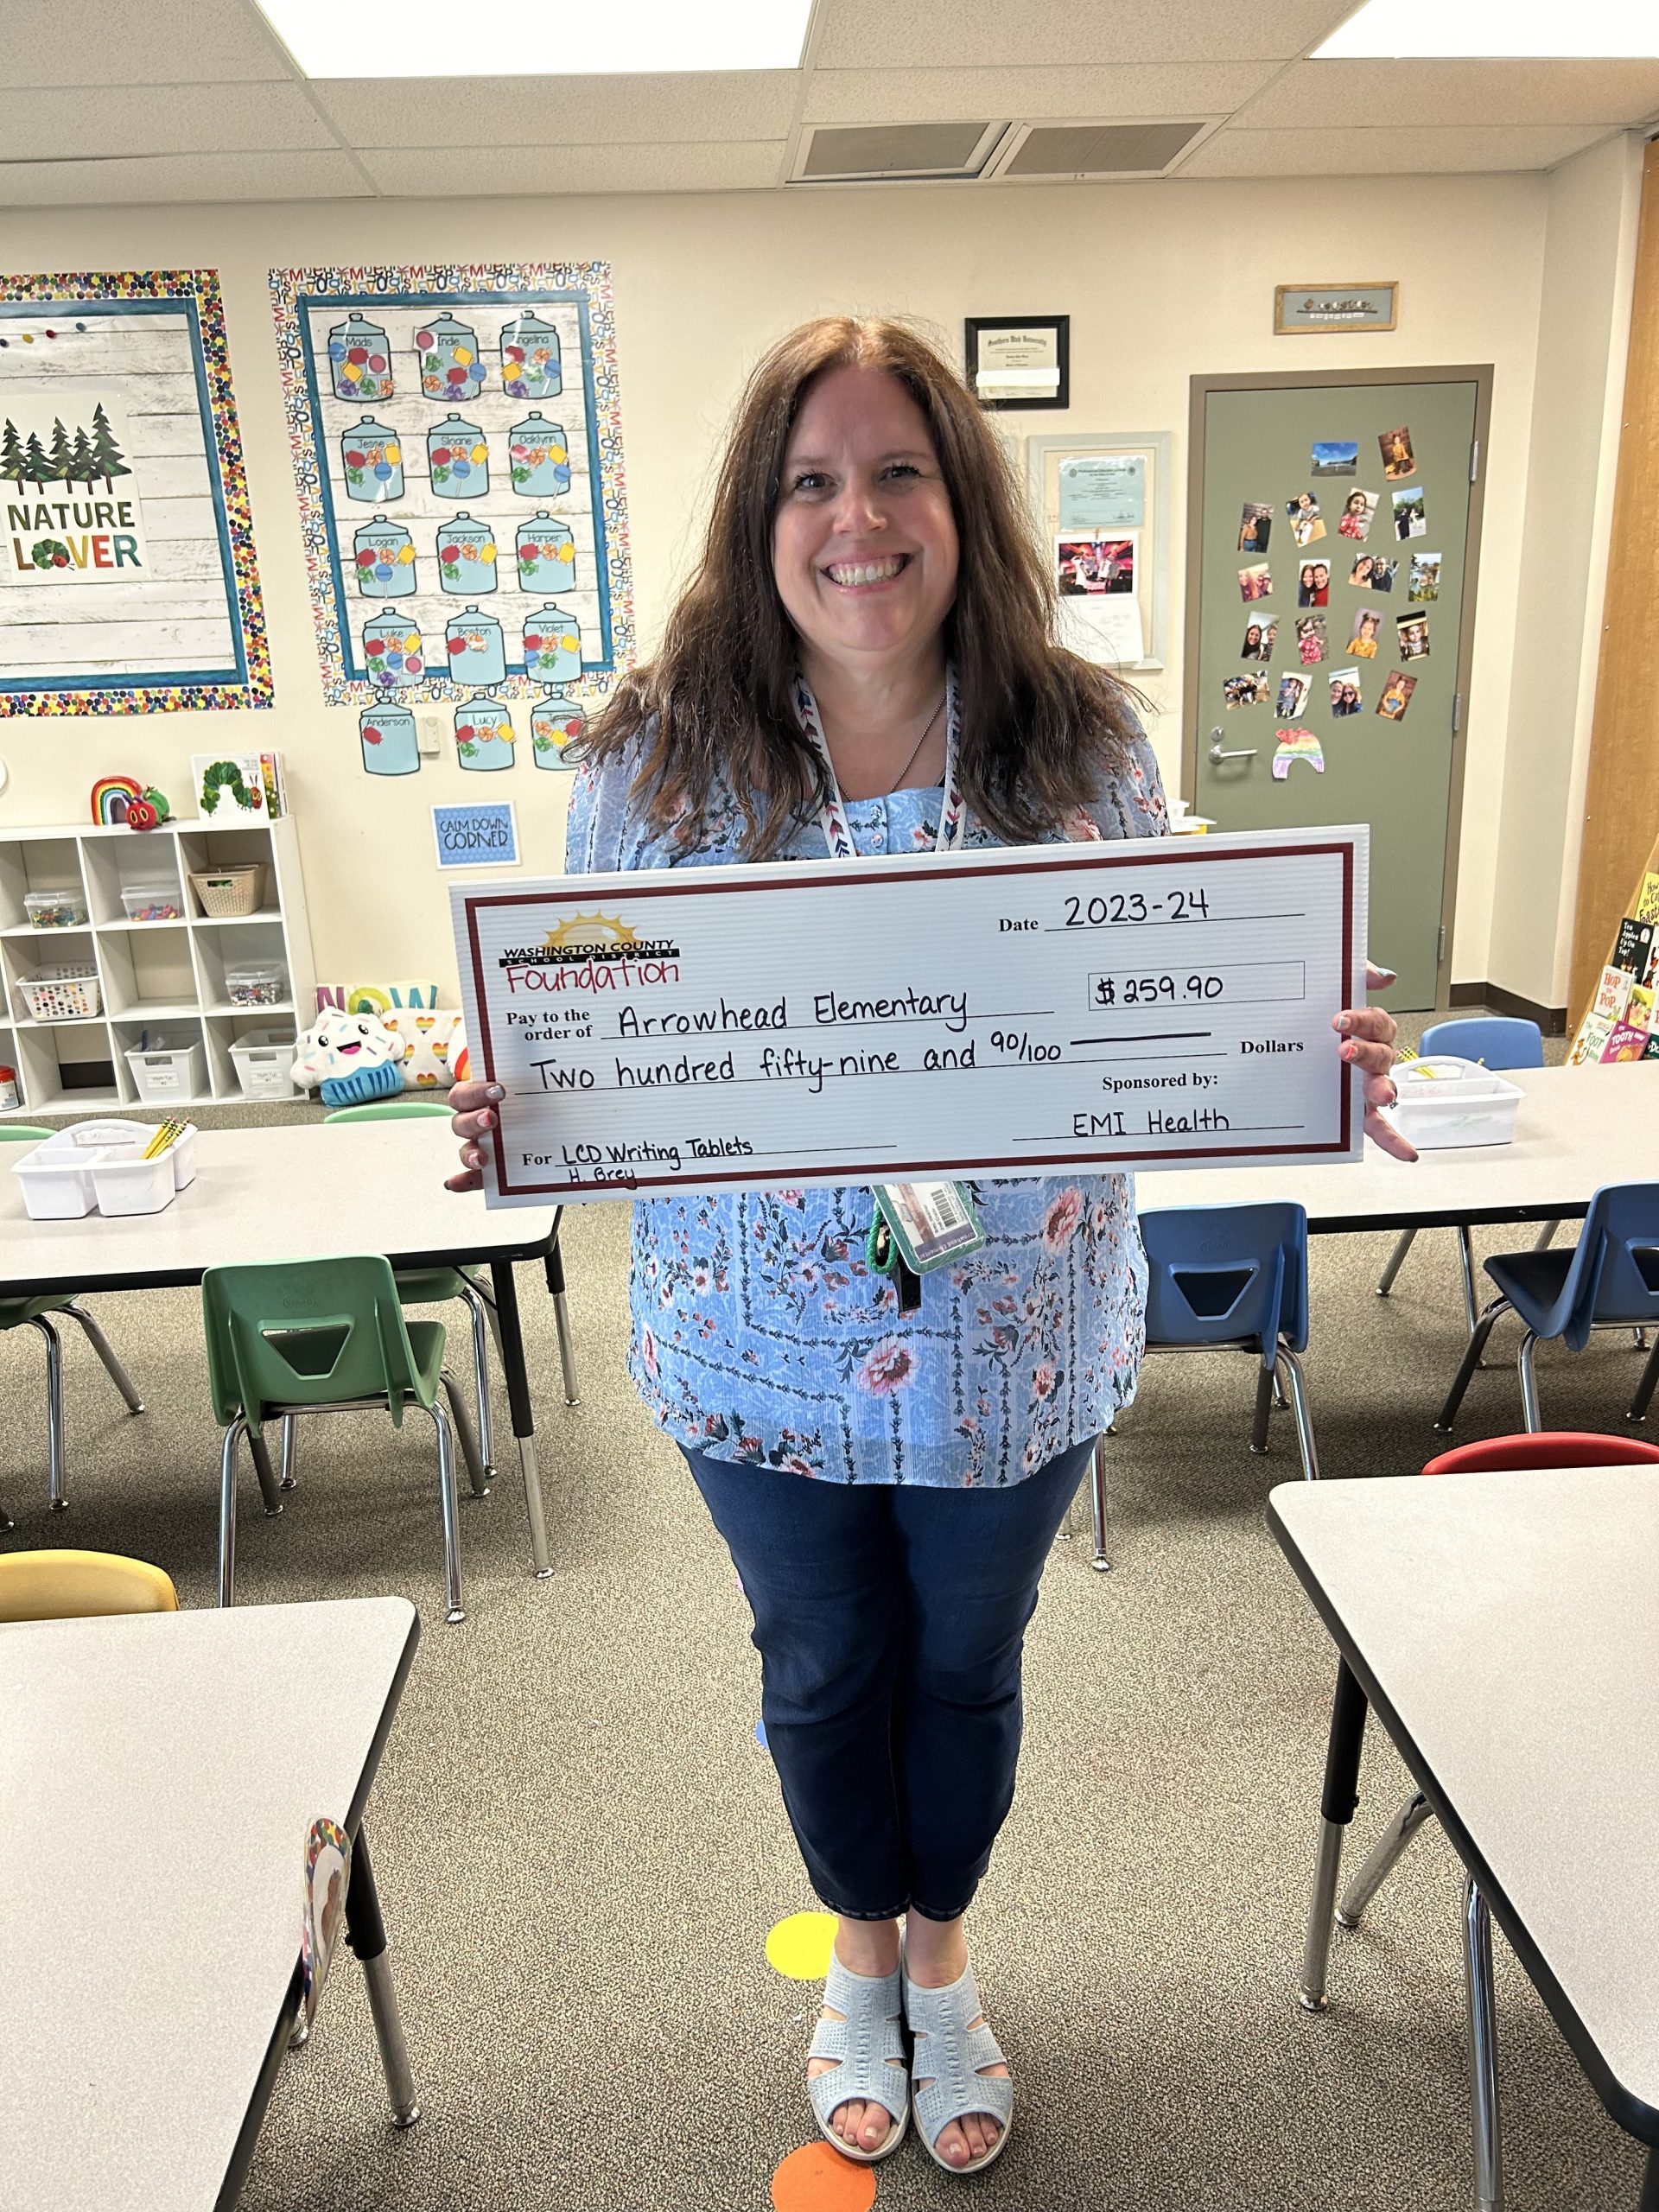 Ms. Brey received a Foundation Grant for the 2023-24 school year. Thank you, EMI Health, for the new LCD writing tablets for our classroom.